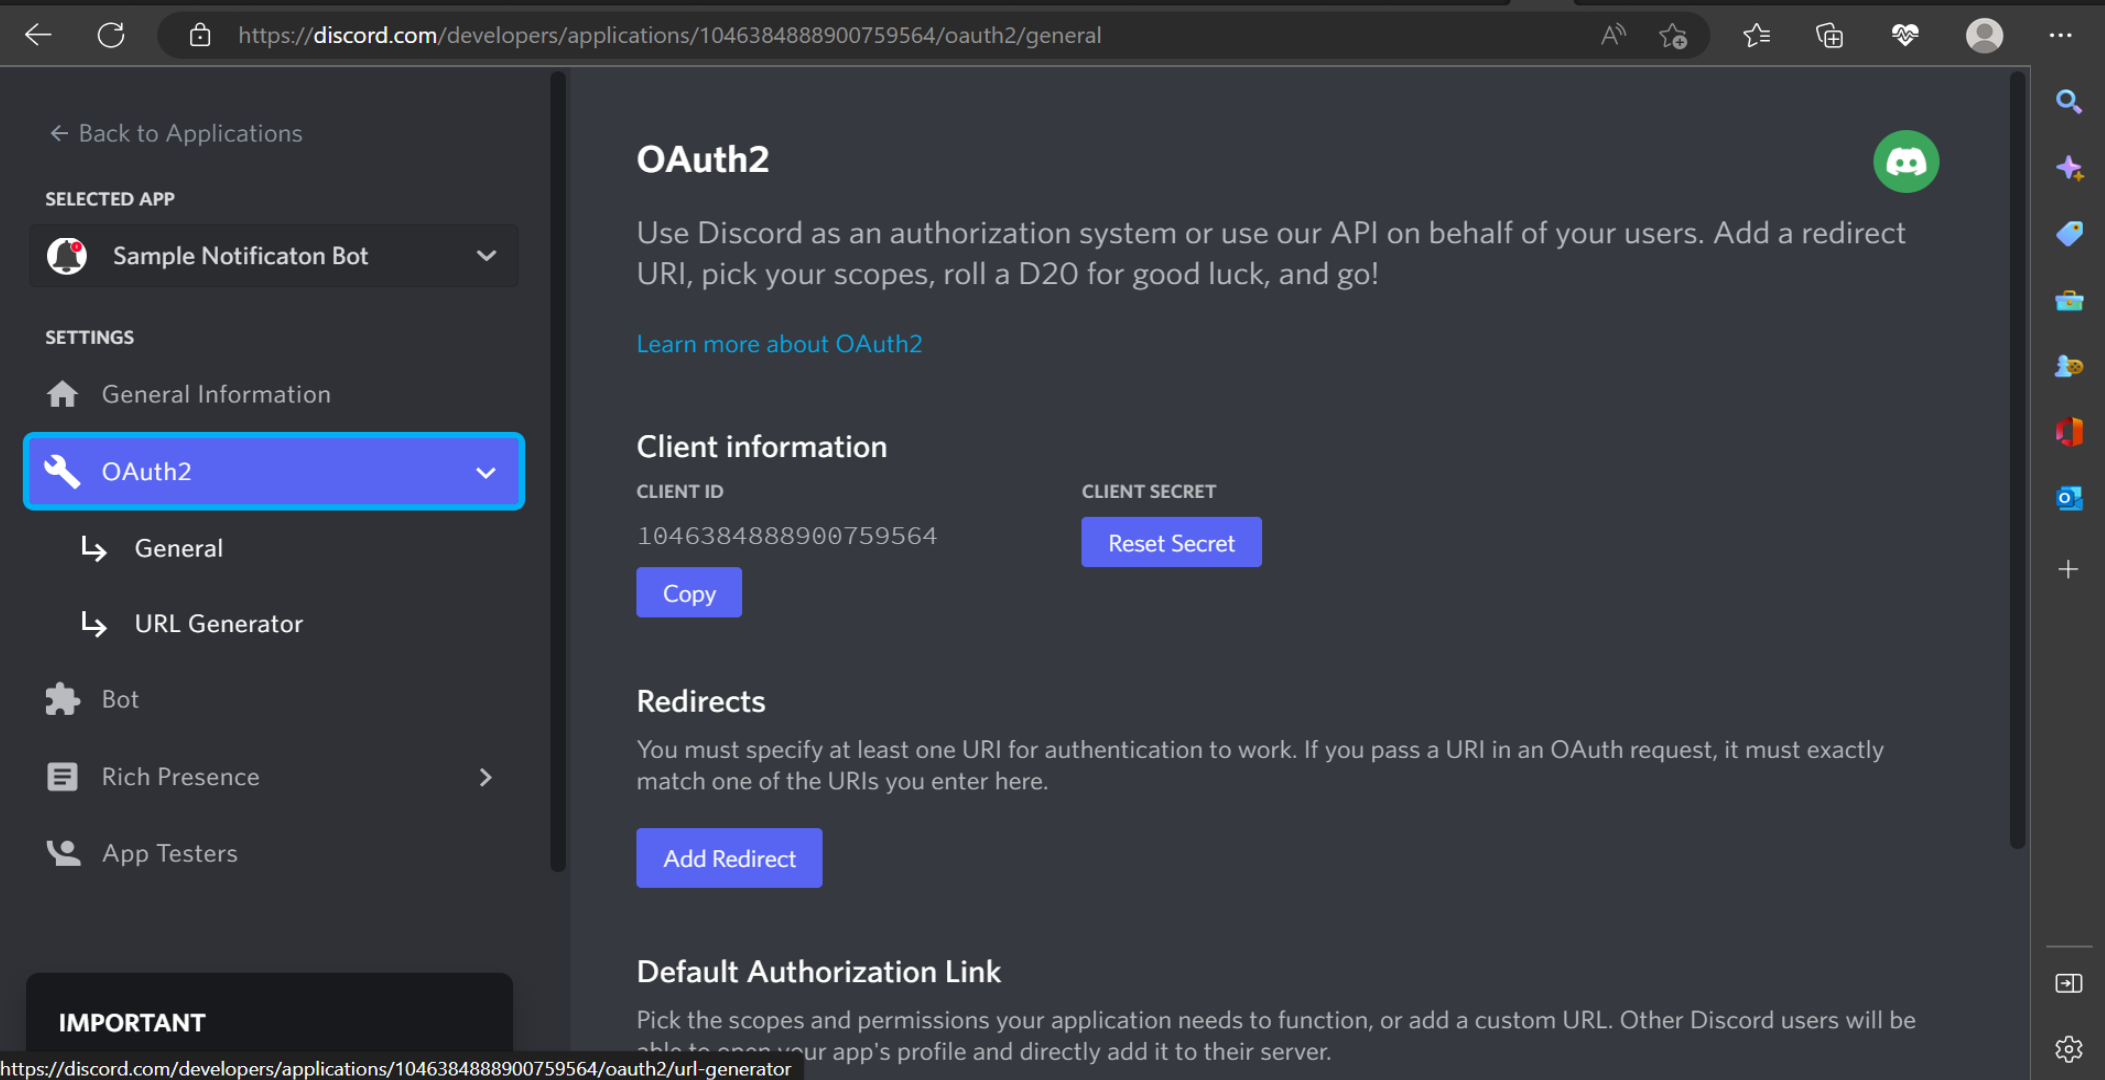 The OAuth2 page of the Discord developer portal.